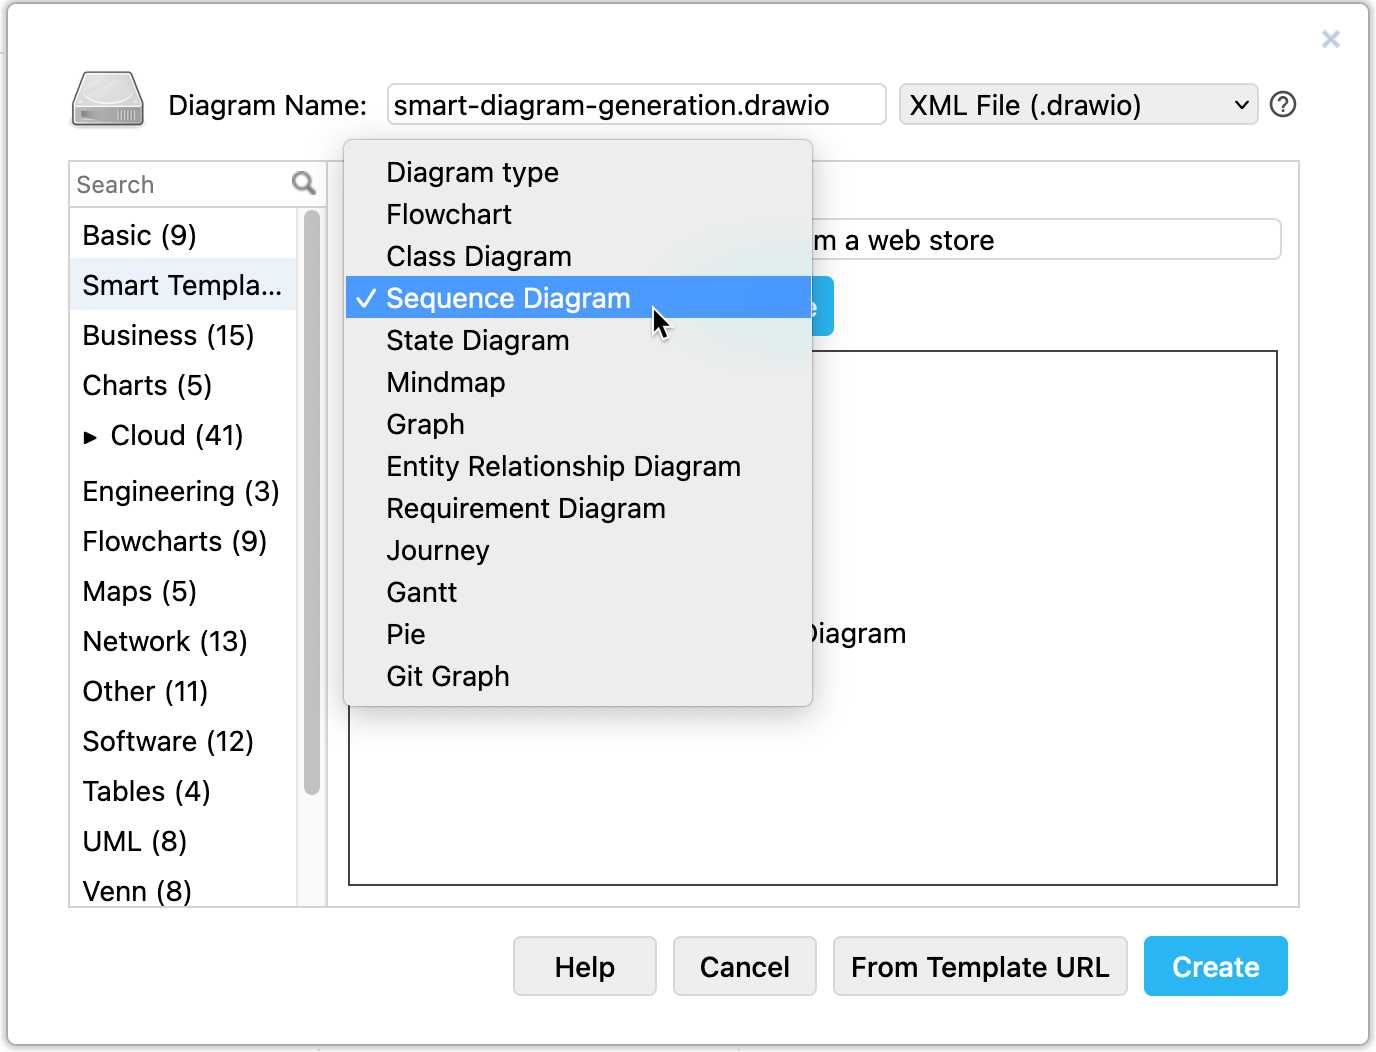 Select the type of diagram that you want to generate in the template library in draw.io